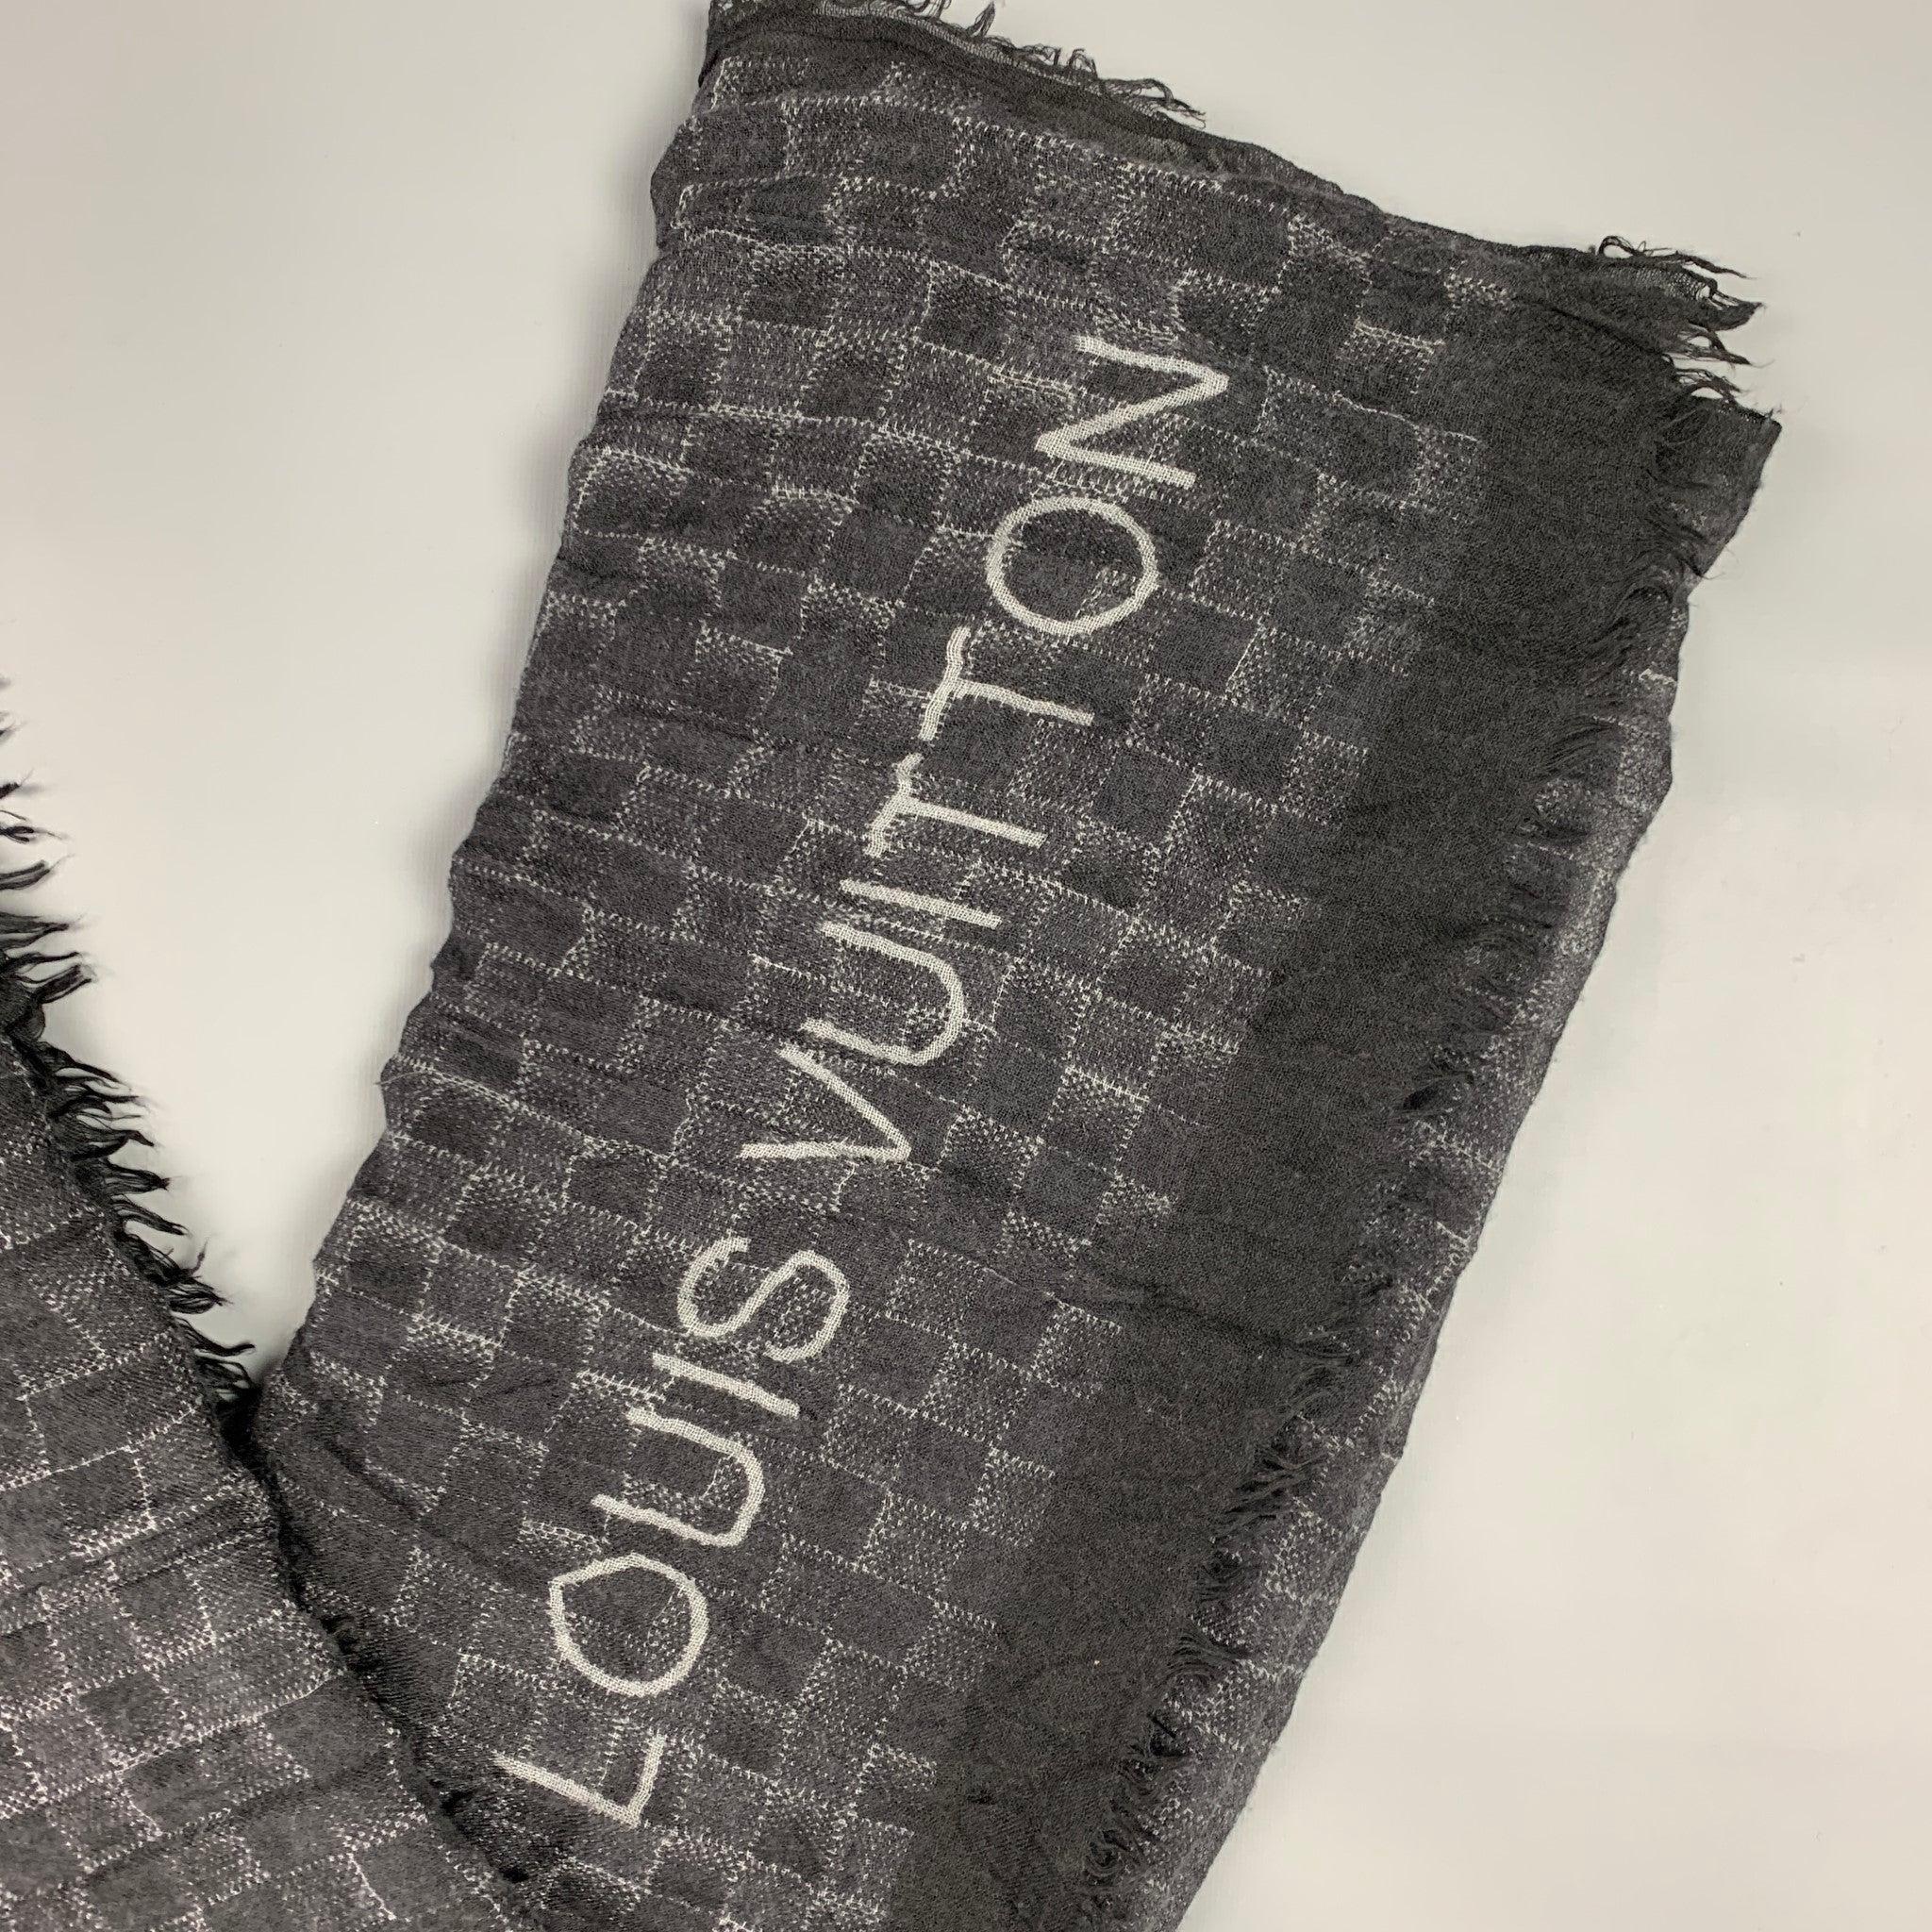 LOUIS VUITTON scarf comes in a black & grey damier print with a fringe trim. Made in Italy.
Very Good
Pre-Owned Condition. 

Measurements: 
  
74 inches  x 52 inches 
  
  
 
Reference: 116529
Category: Scarves
More Details
    
Brand:  LOUIS